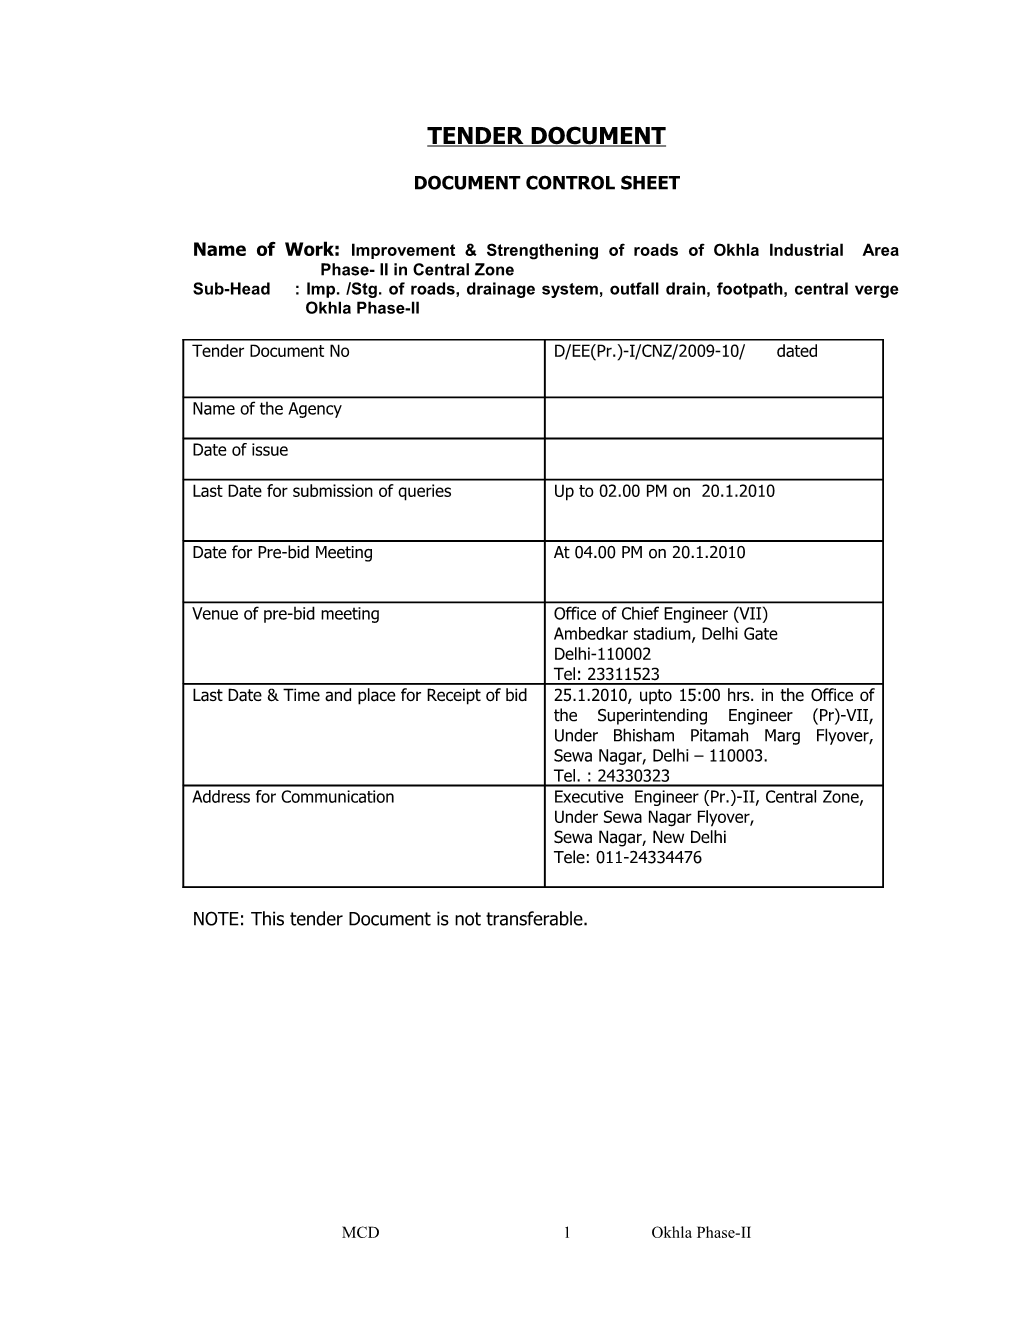 Name of Work: Improvement & Strengthening of Roads of Okhla Industrial Area Phase- II